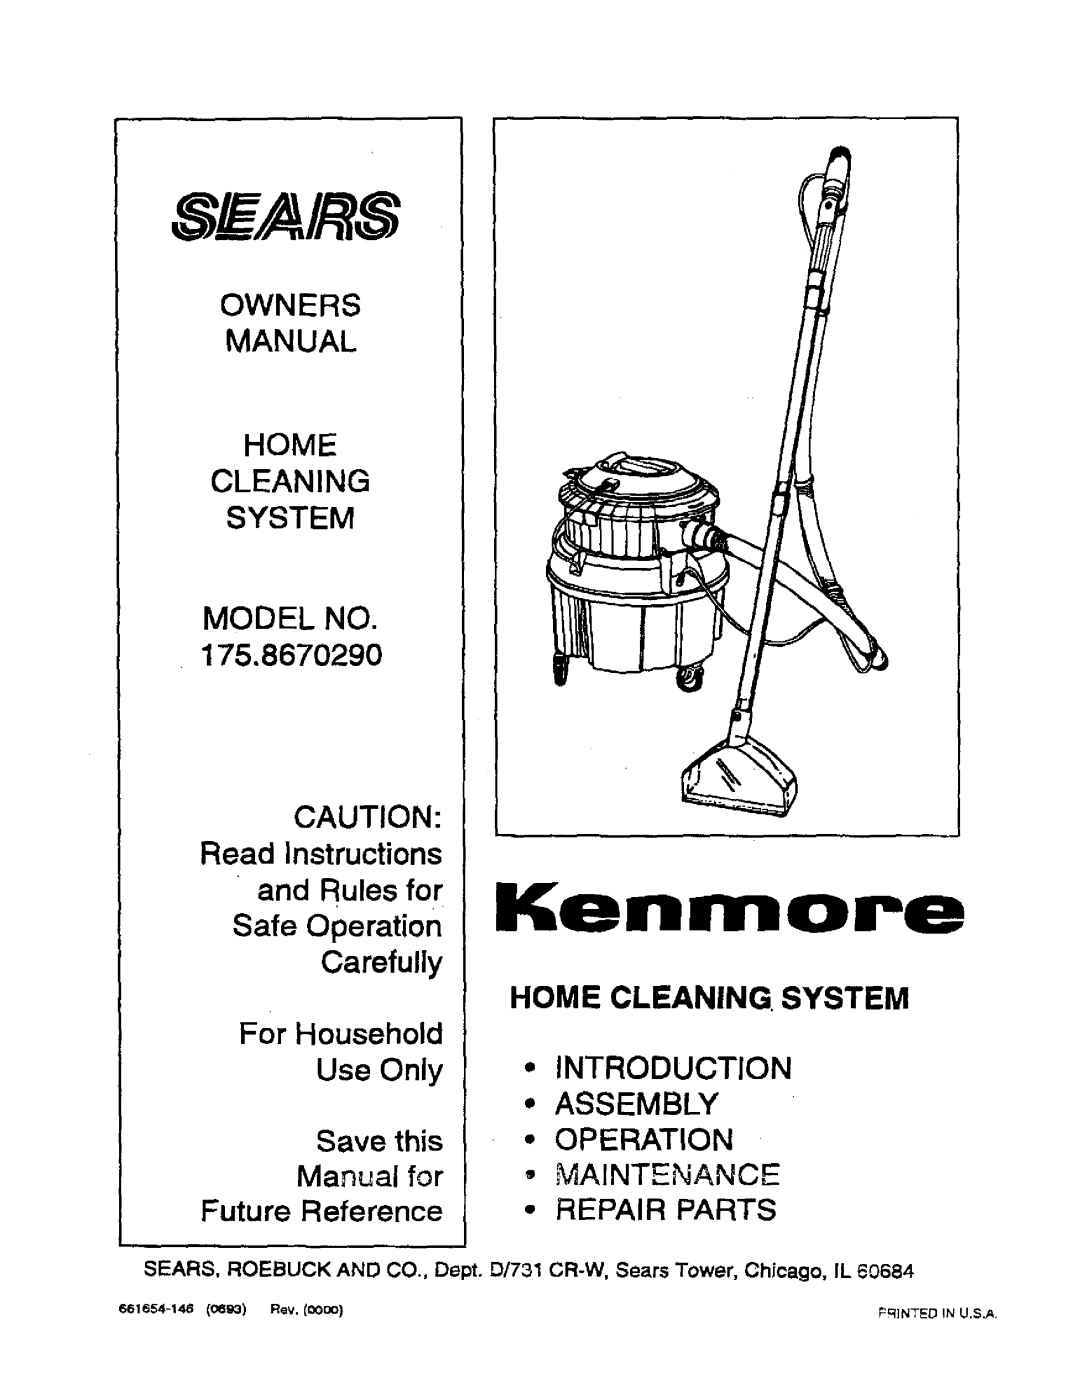 Sears owner manual Owners Manual Home Cleaning System, Model No, 175.8670290, Home Cleaning. System, For Household 